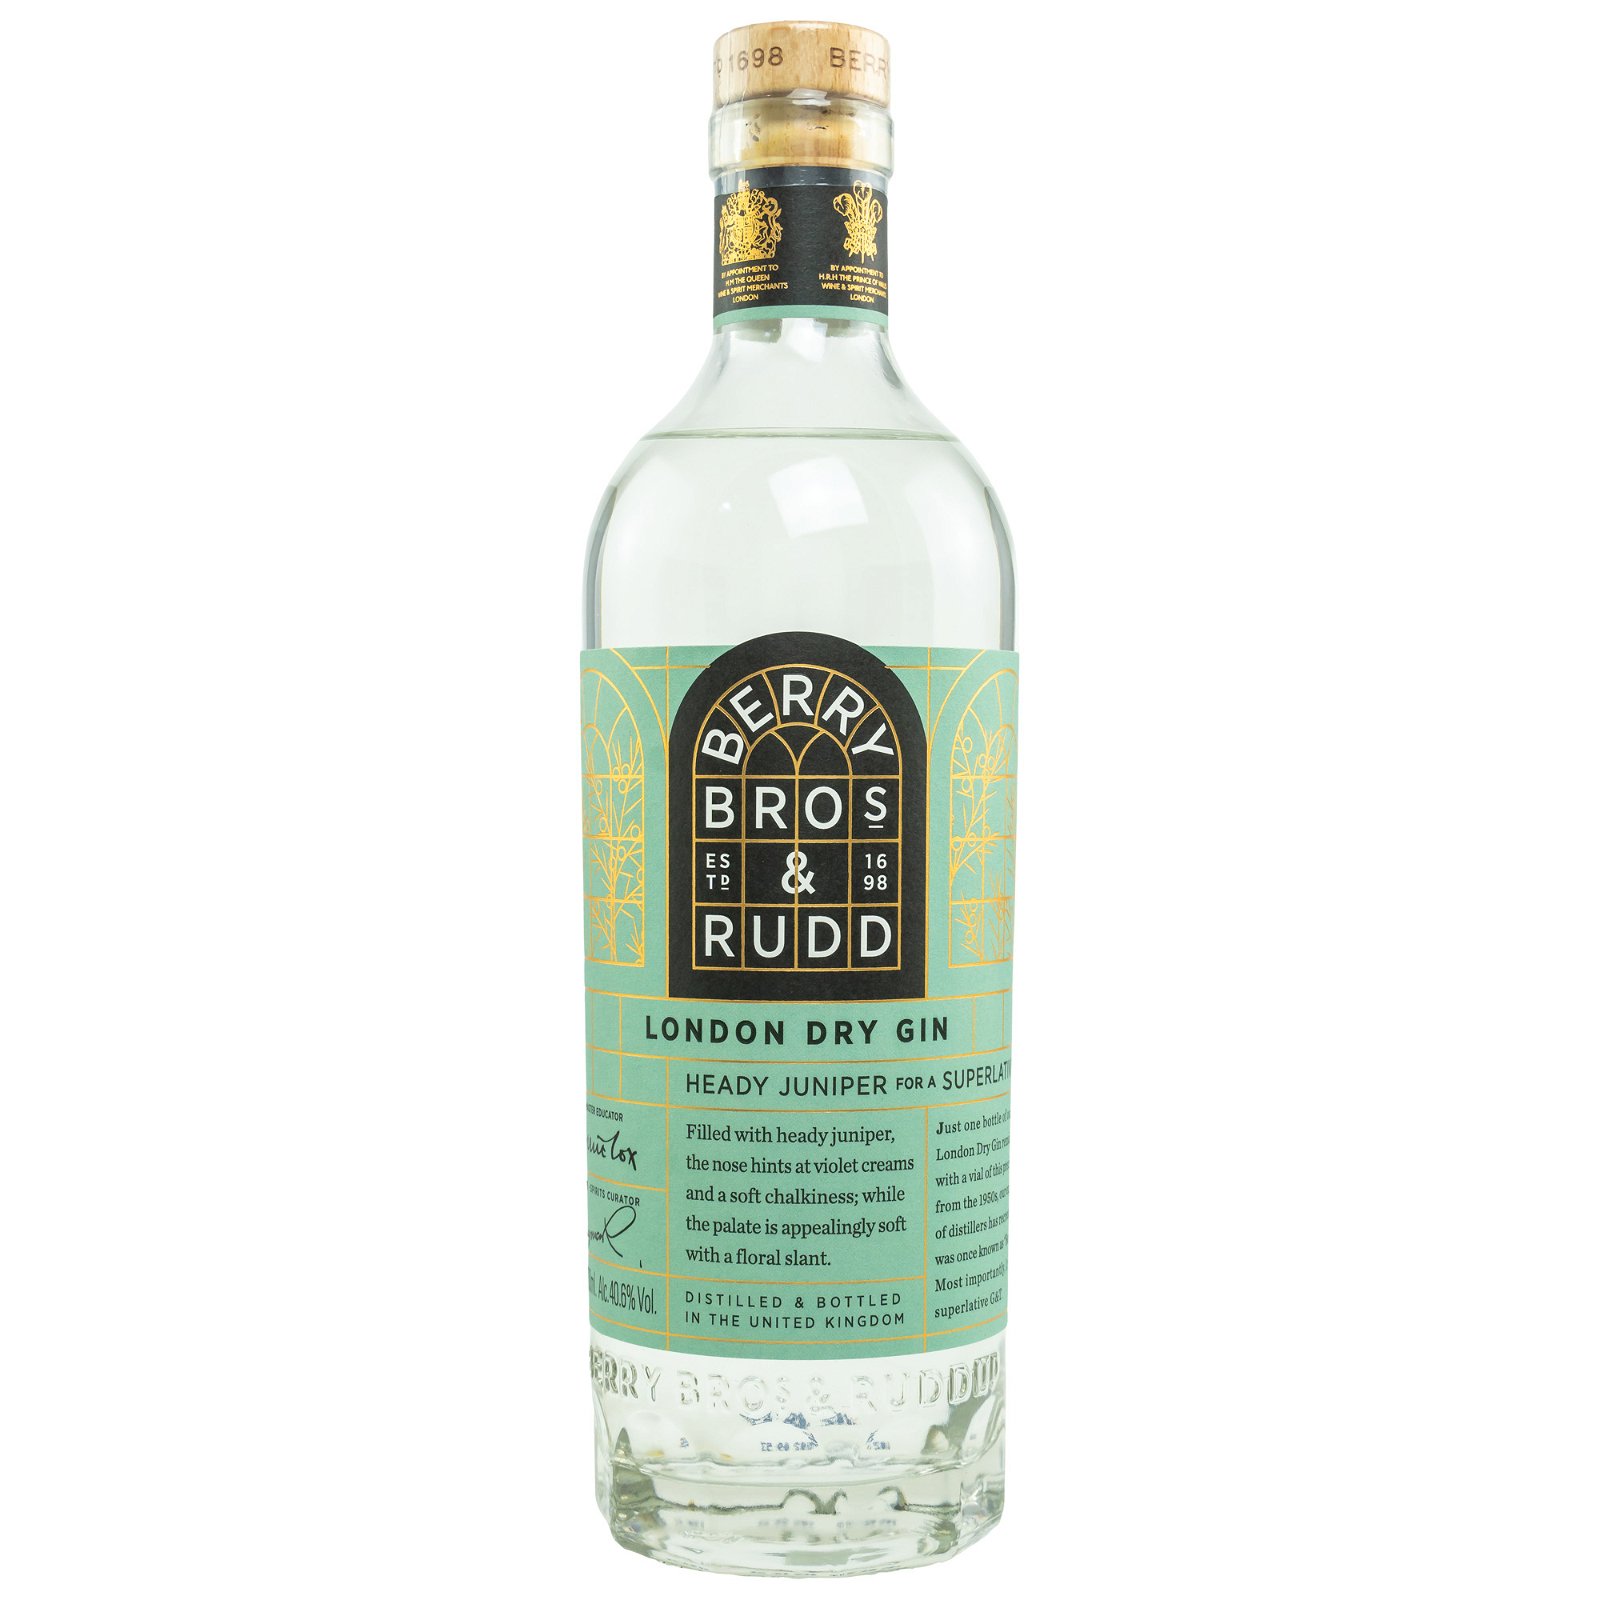 London Dry Gin  (Berry Bros and Rudd)